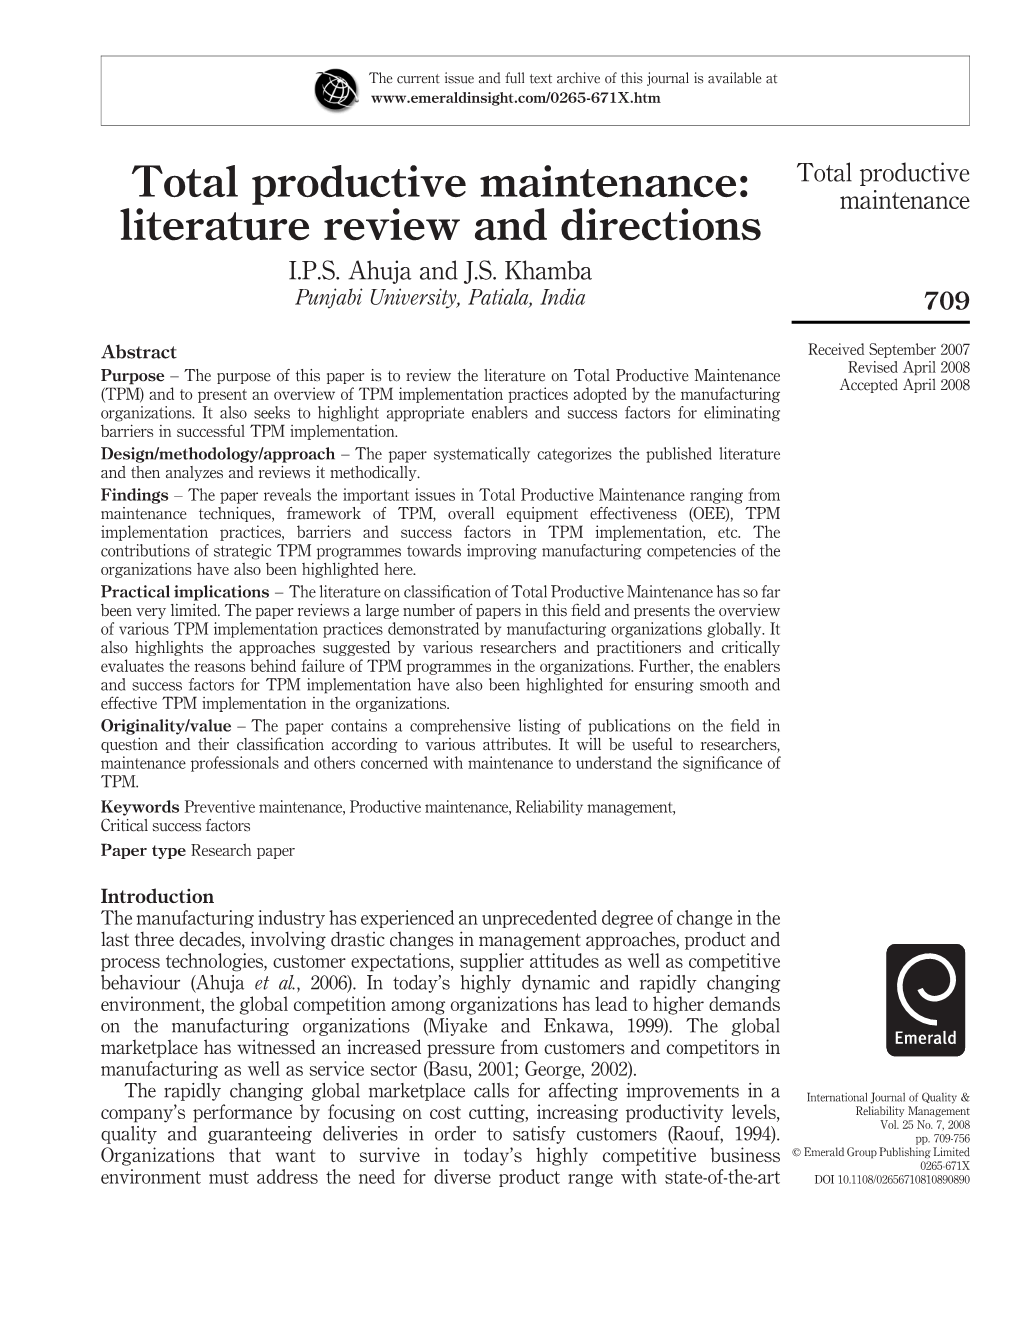 Total Productive Maintenance: Maintenance Literature Review and Directions I.P.S